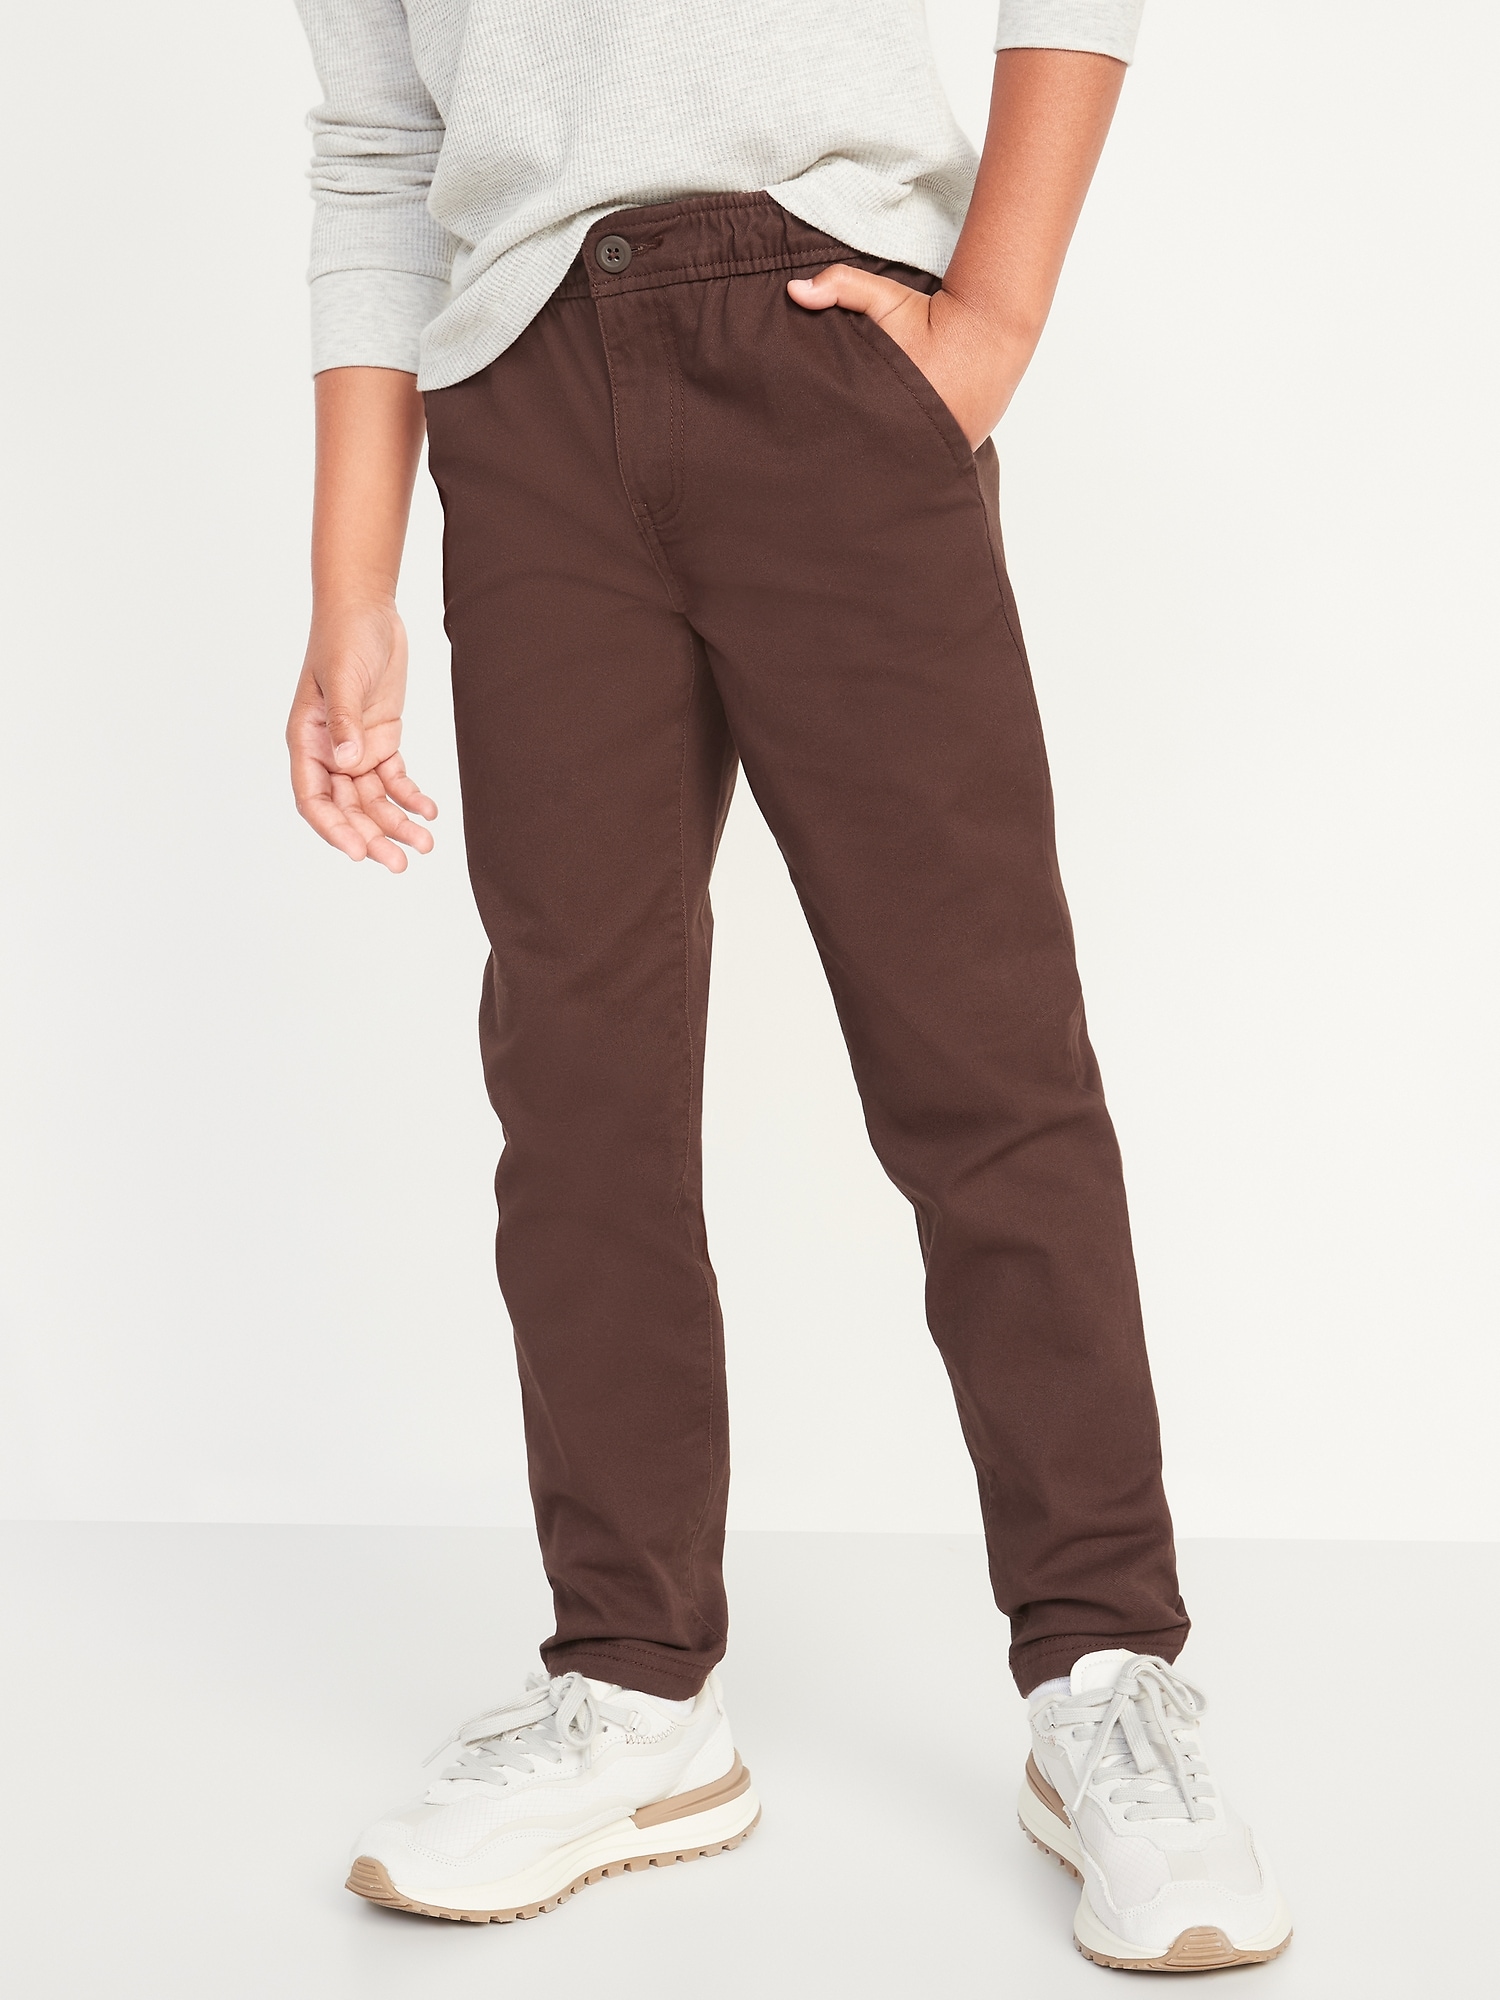 Old Navy OGC Chino Built-In Flex Taper Pants for Boys brown. 1